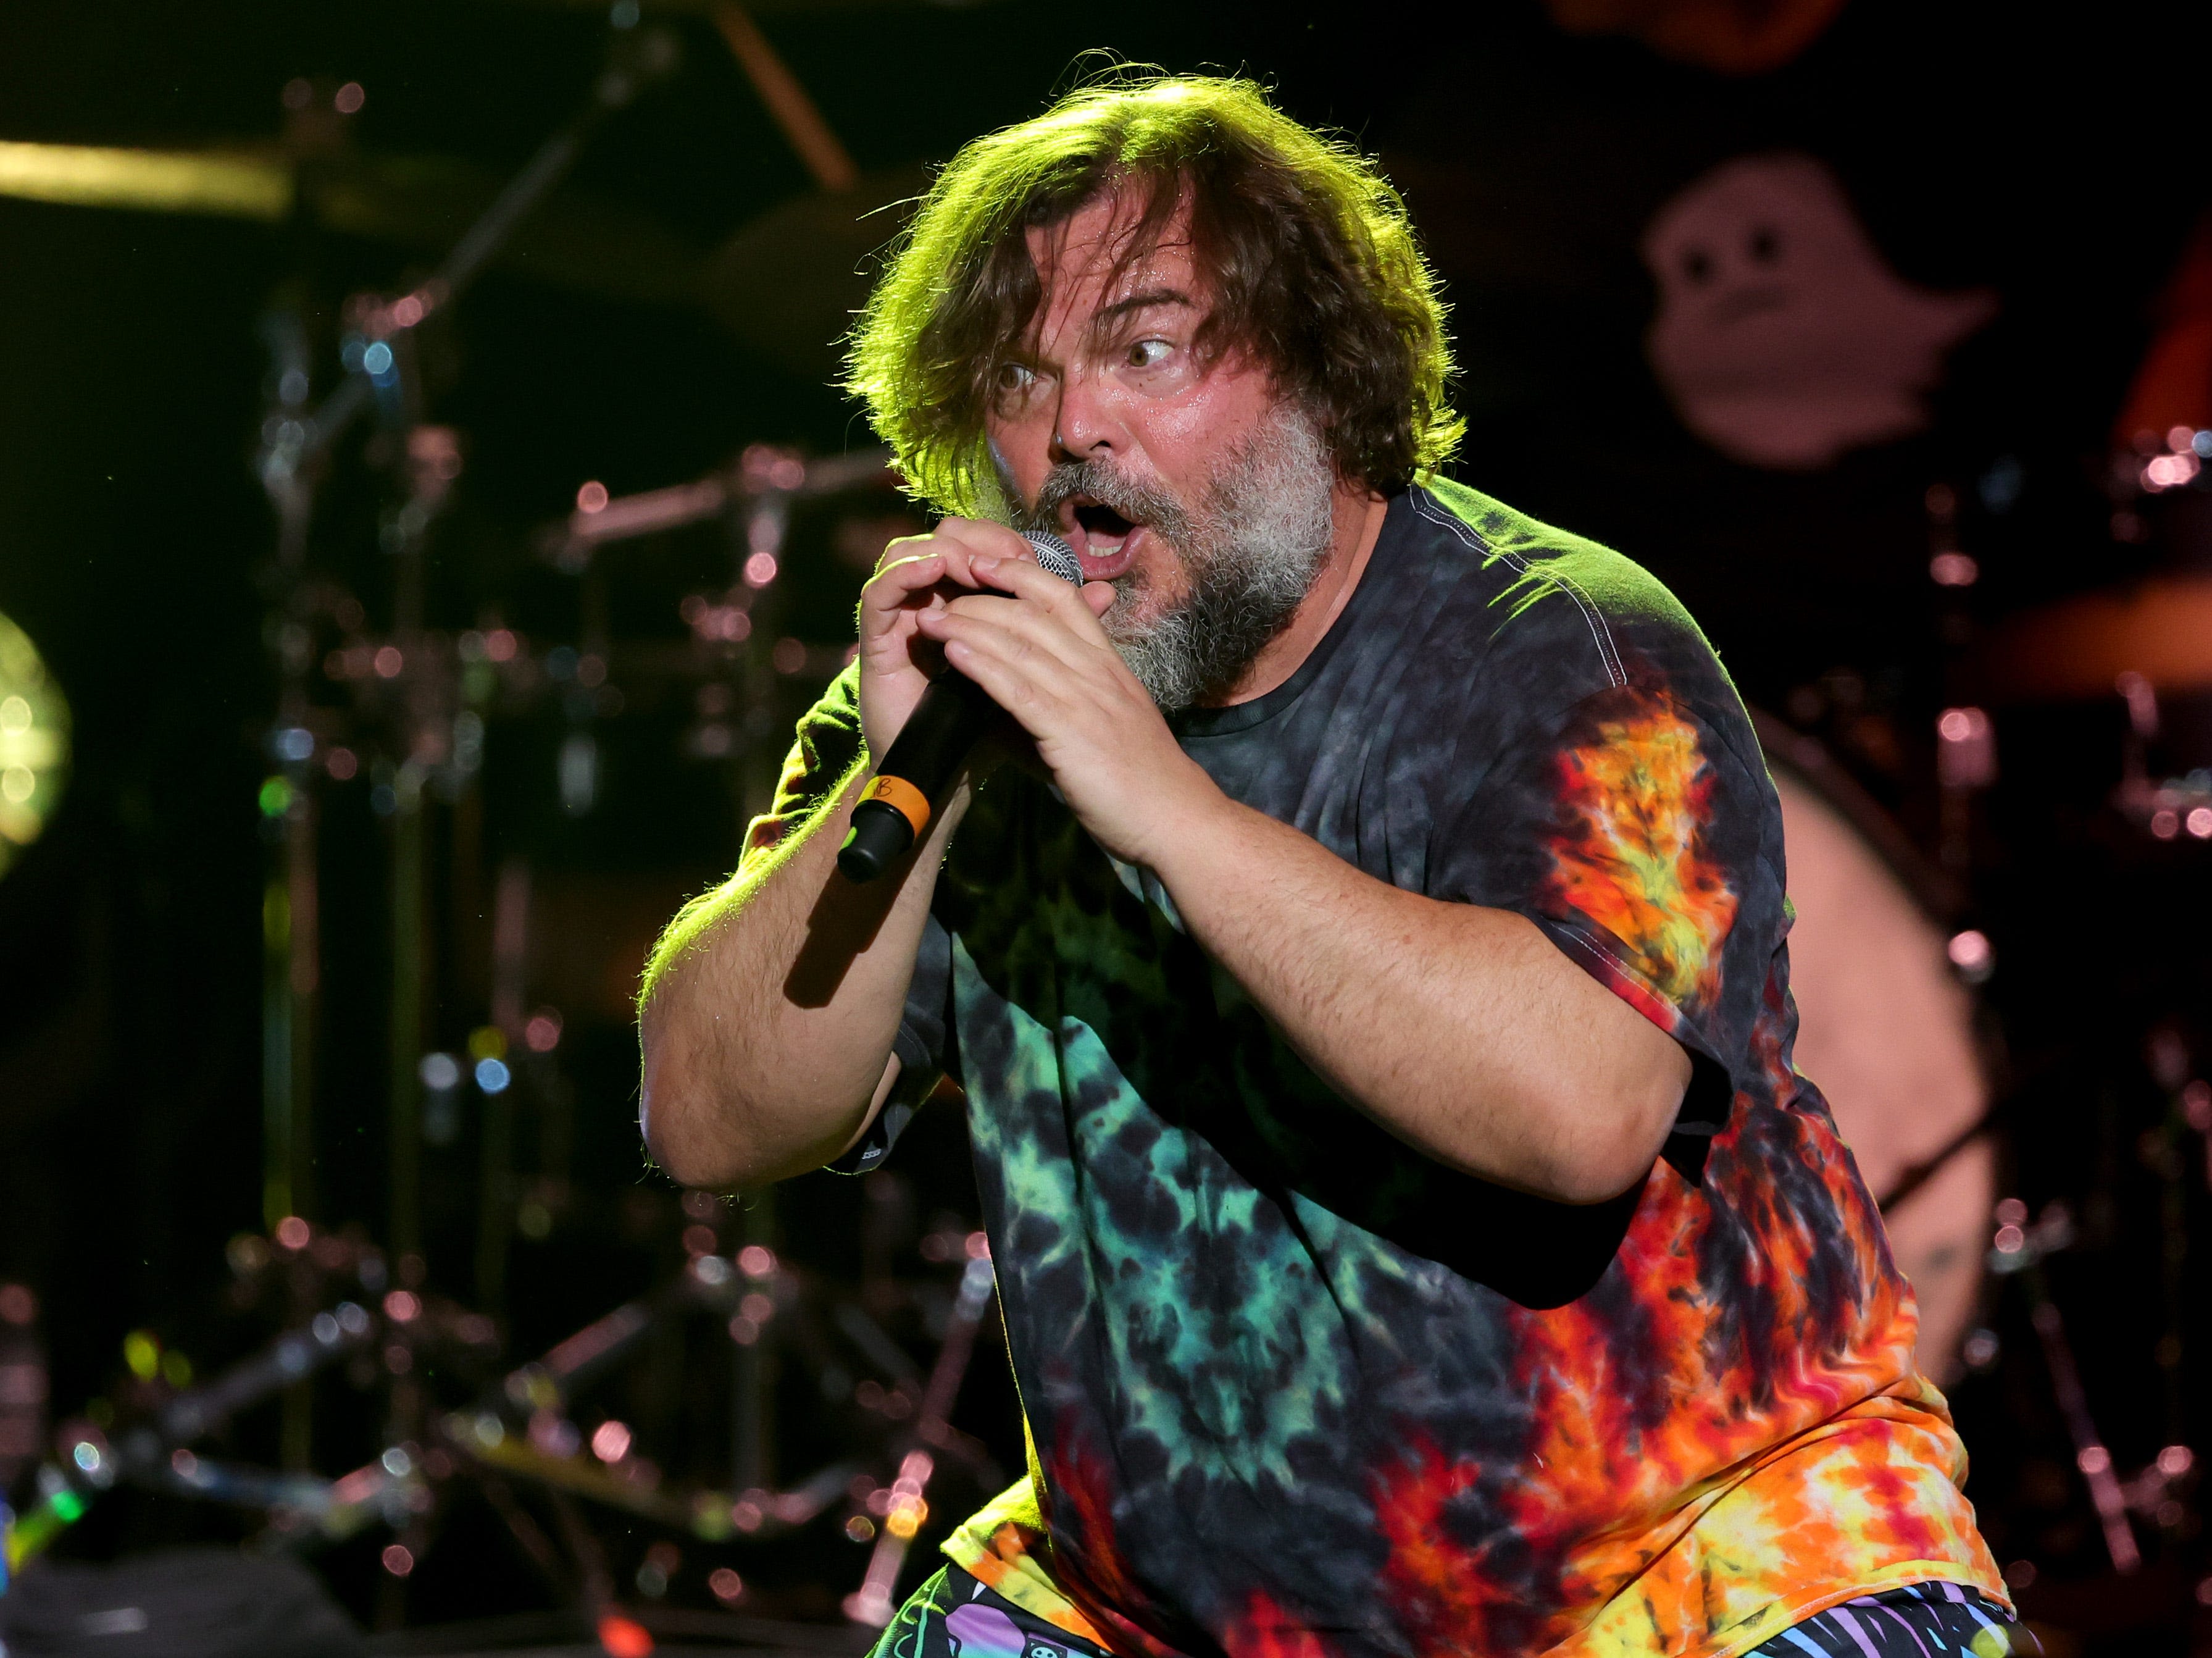 Jack Black responds to students' request to attend 'School of Rock' musical production